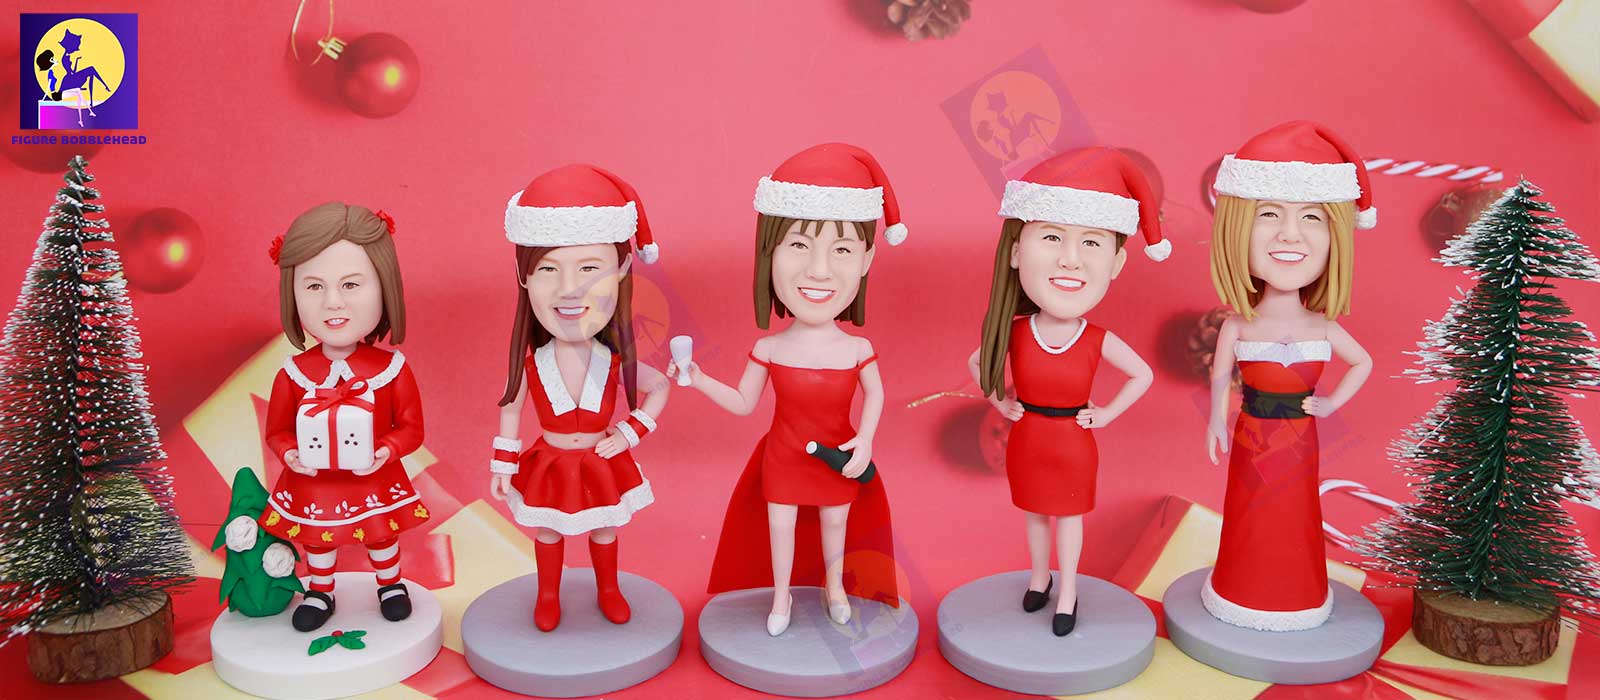 The Worth of Custom Bobbleheads as Christmas Gifts